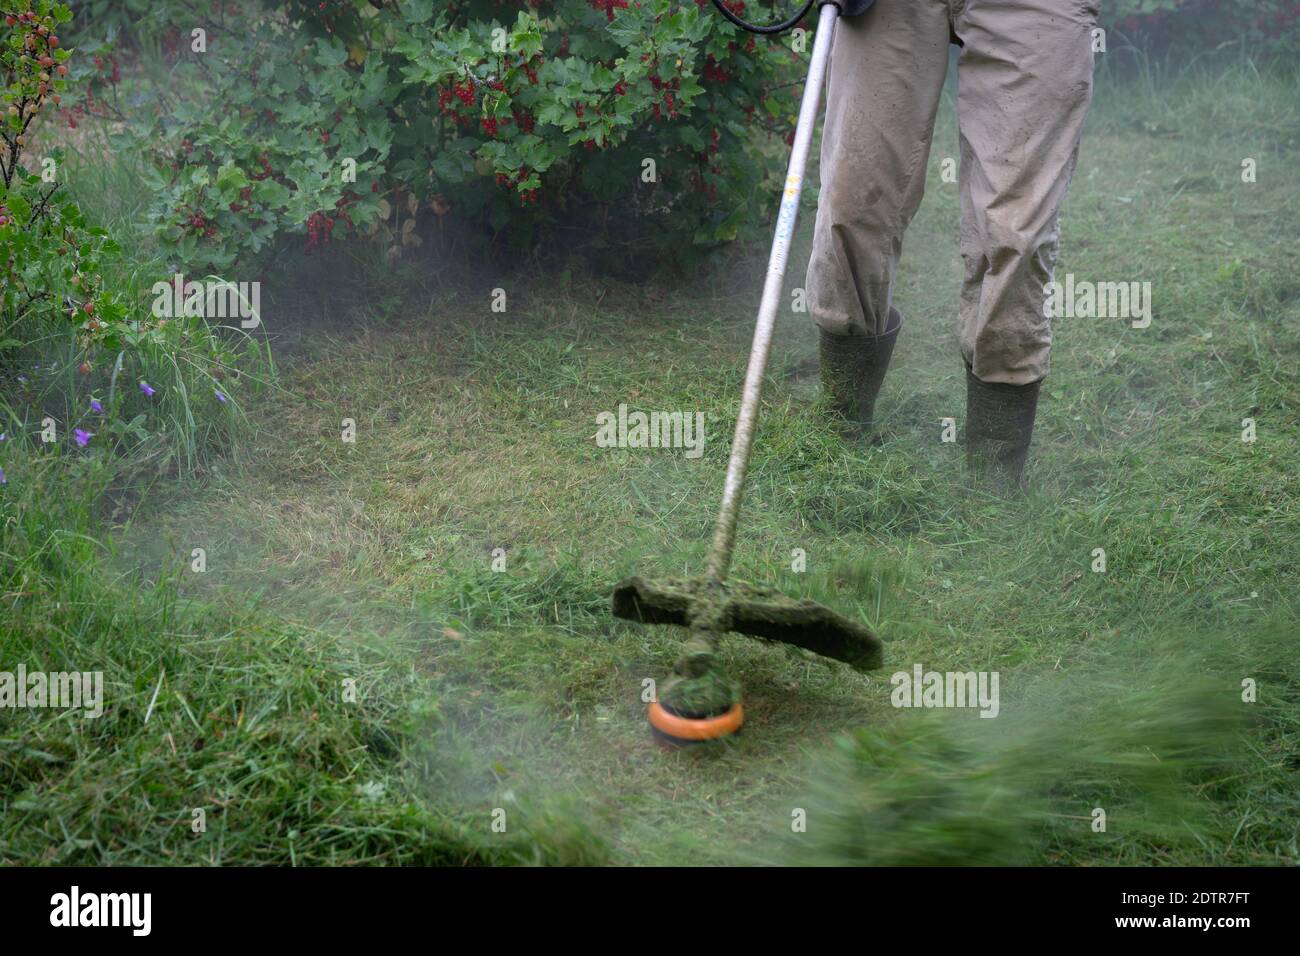 Low Section Of Man Working In Yard Stock Photo